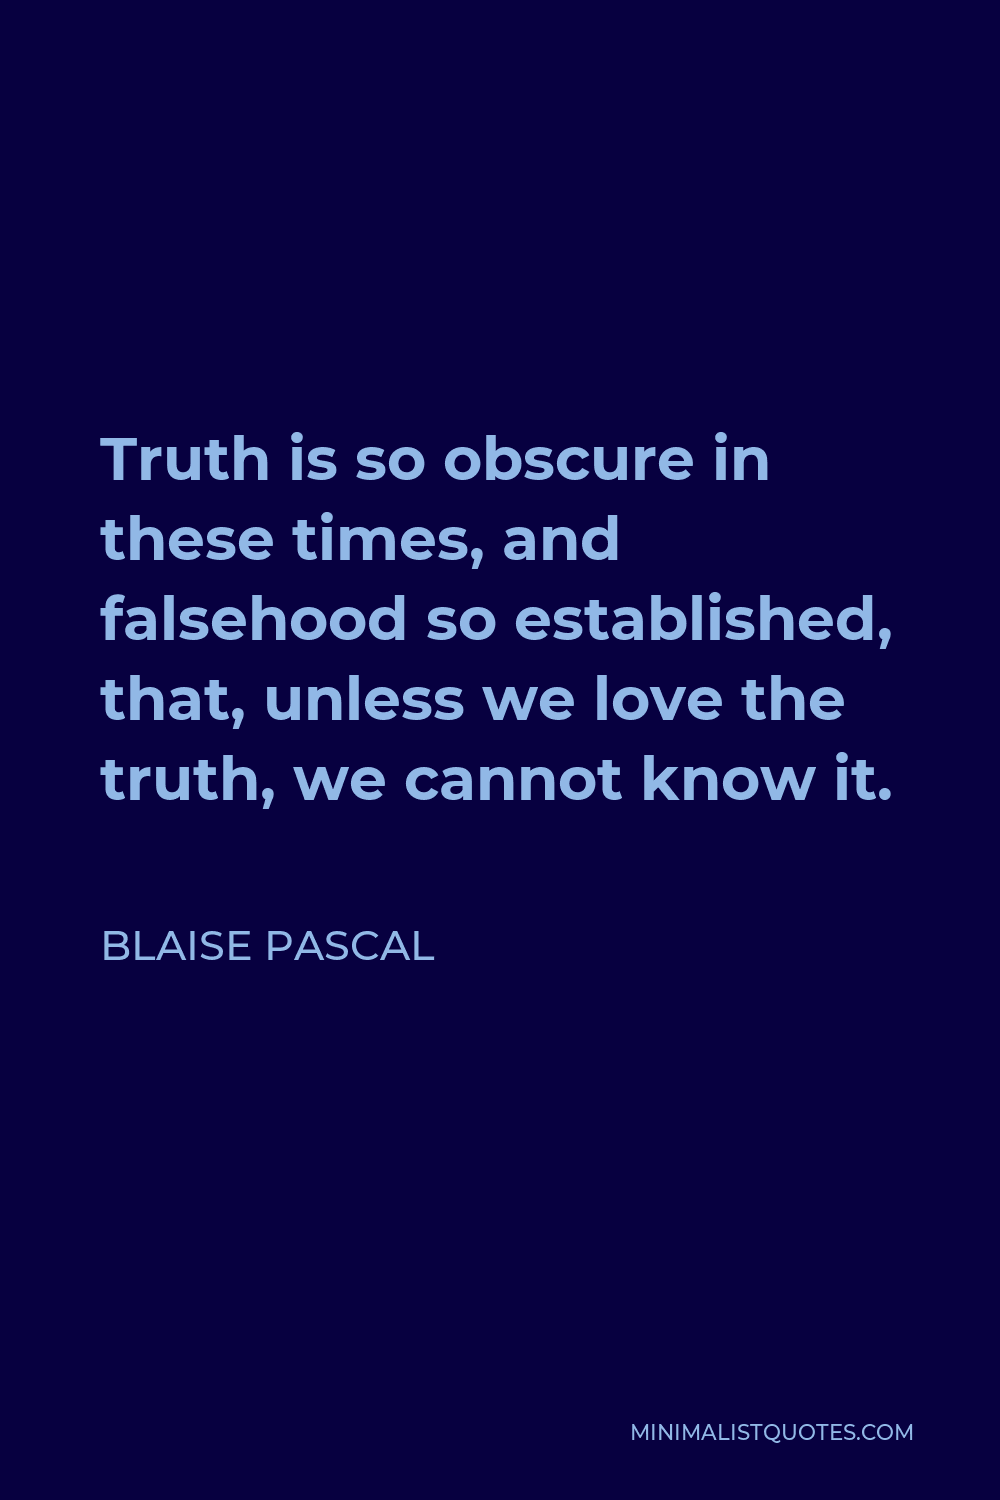 Blaise Pascal Quote - Truth is so obscure in these times, and falsehood so established, that, unless we love the truth, we cannot know it.